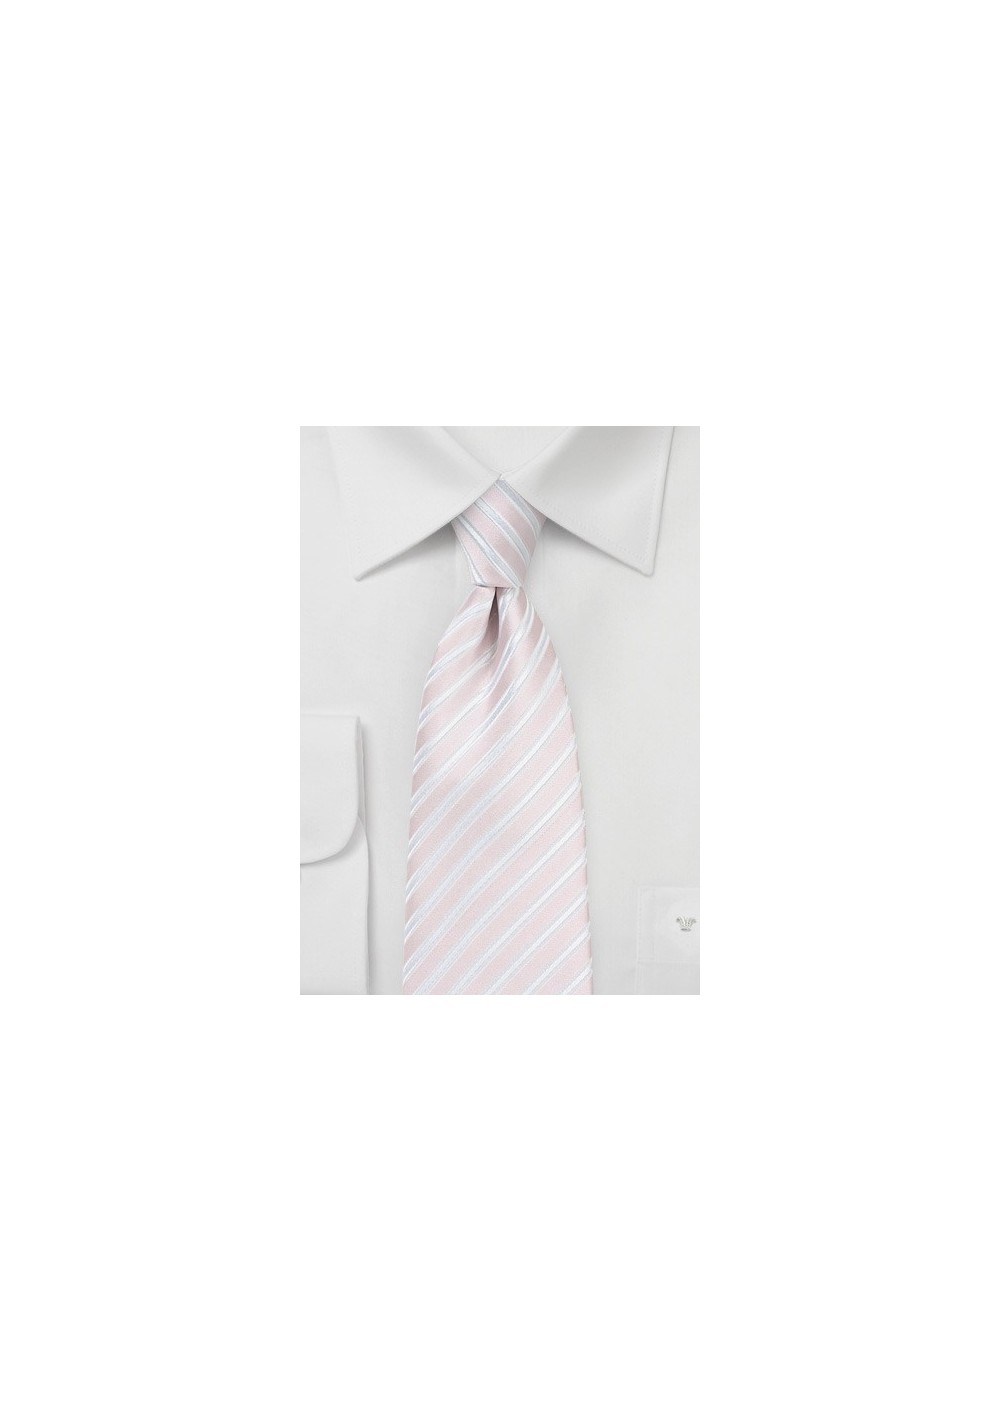 Pastel Pink and White Tie in XL Length